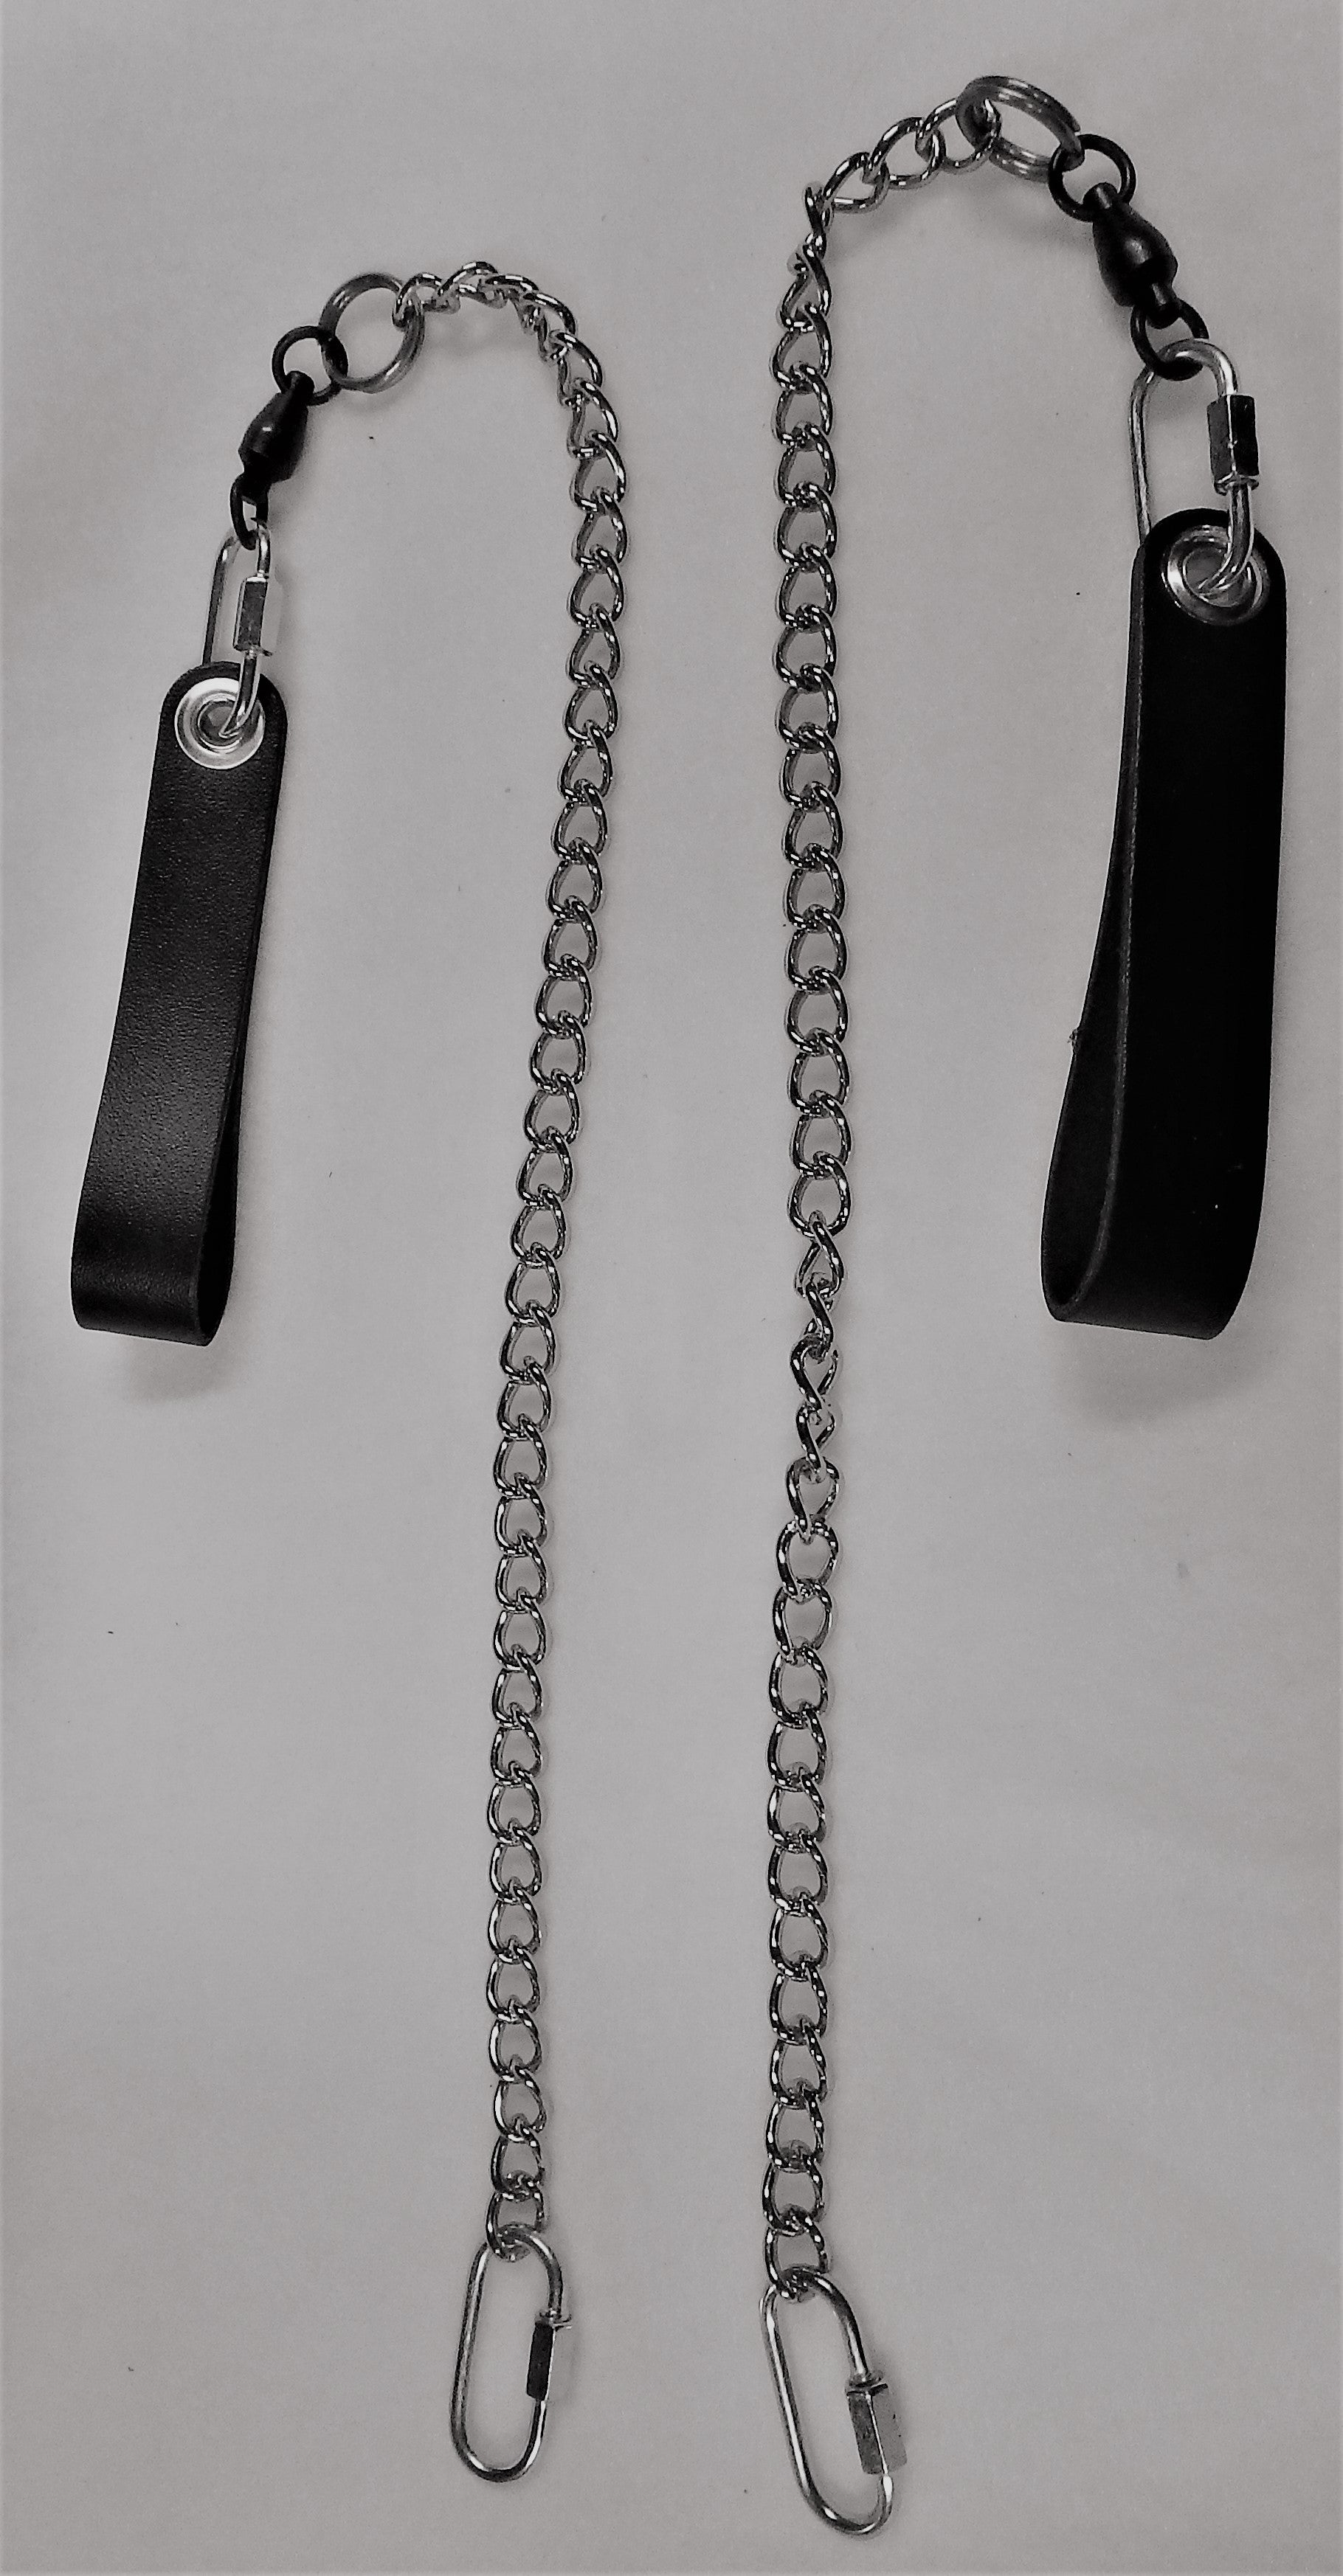 FIRE MECCA twist link chain handles with single leather loop and quick link attachment